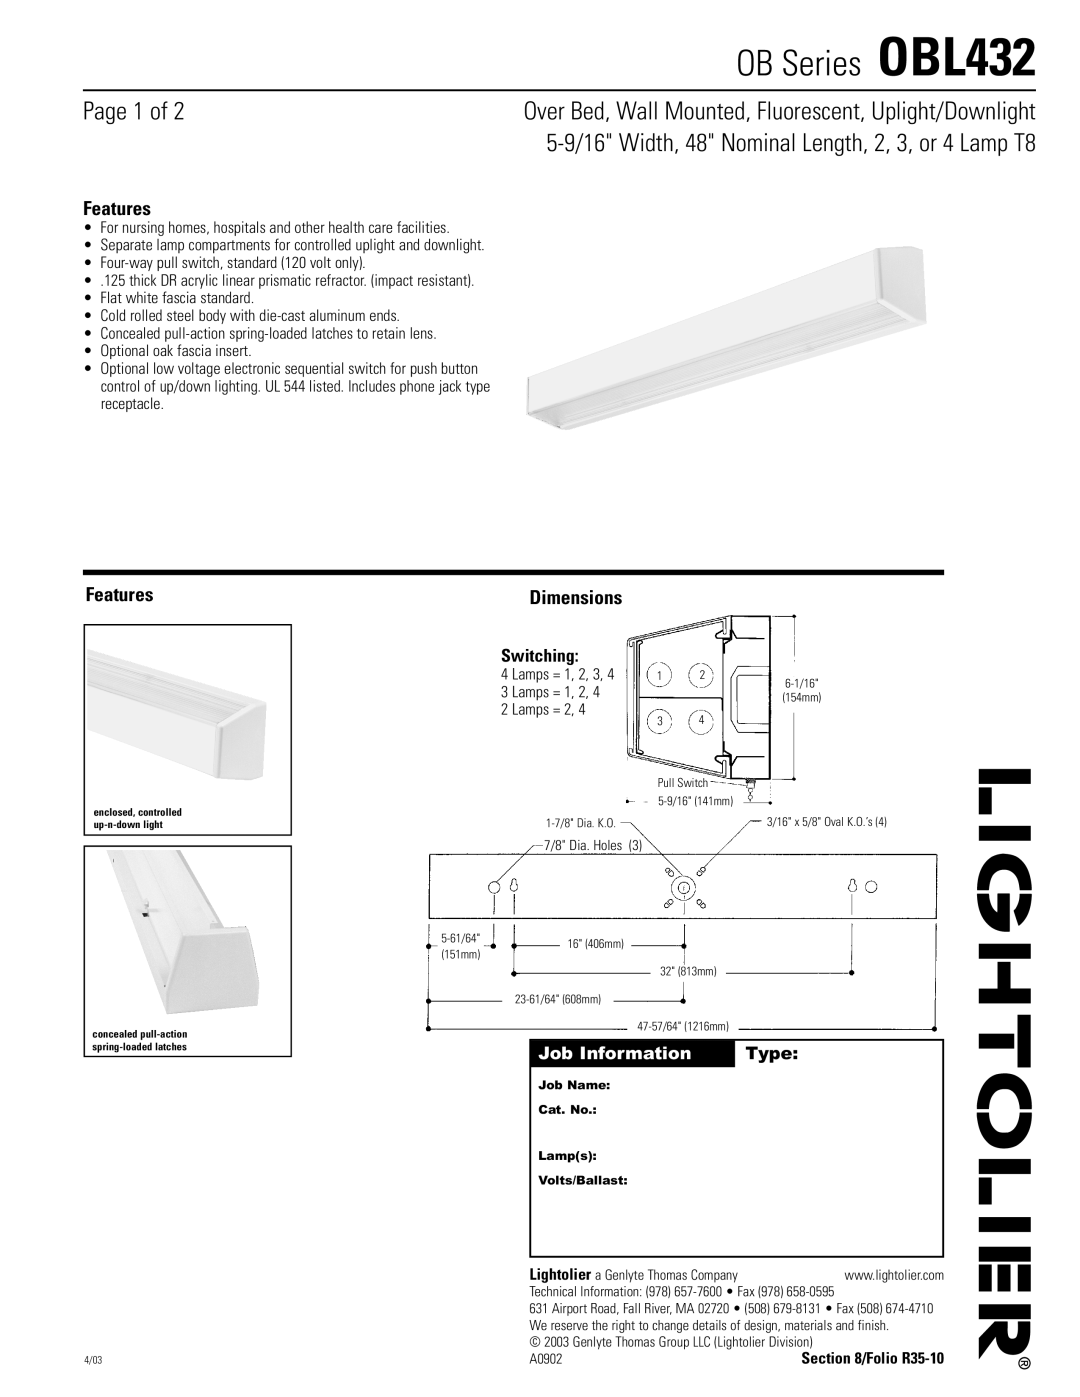 Lightolier dimensions Features, Dimensions, Switching, Job Information, Type, OB Series OBL432, Page 1 of 